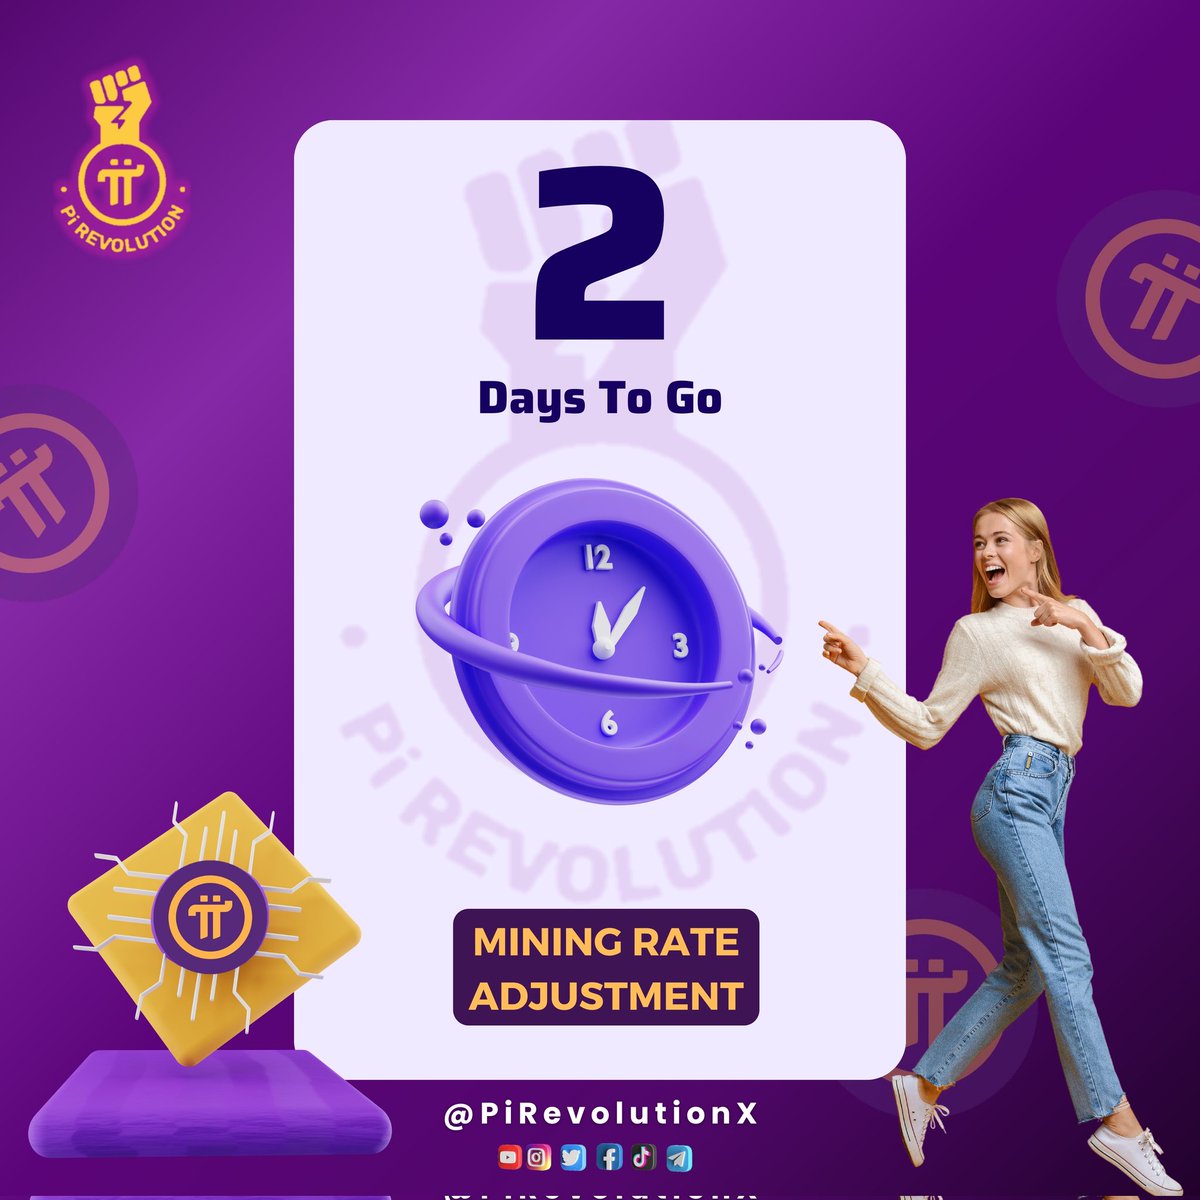 ⏳✨ Time is ticking! Only 2 days left before the mining rate adjustment kicks in! ⛏️ Don't miss your chance to mine Pi at the current rate. Any predictions on how much of a drop we'll see? Share your thoughts below!

#PiNetwork2024 #Pioneers #minepi